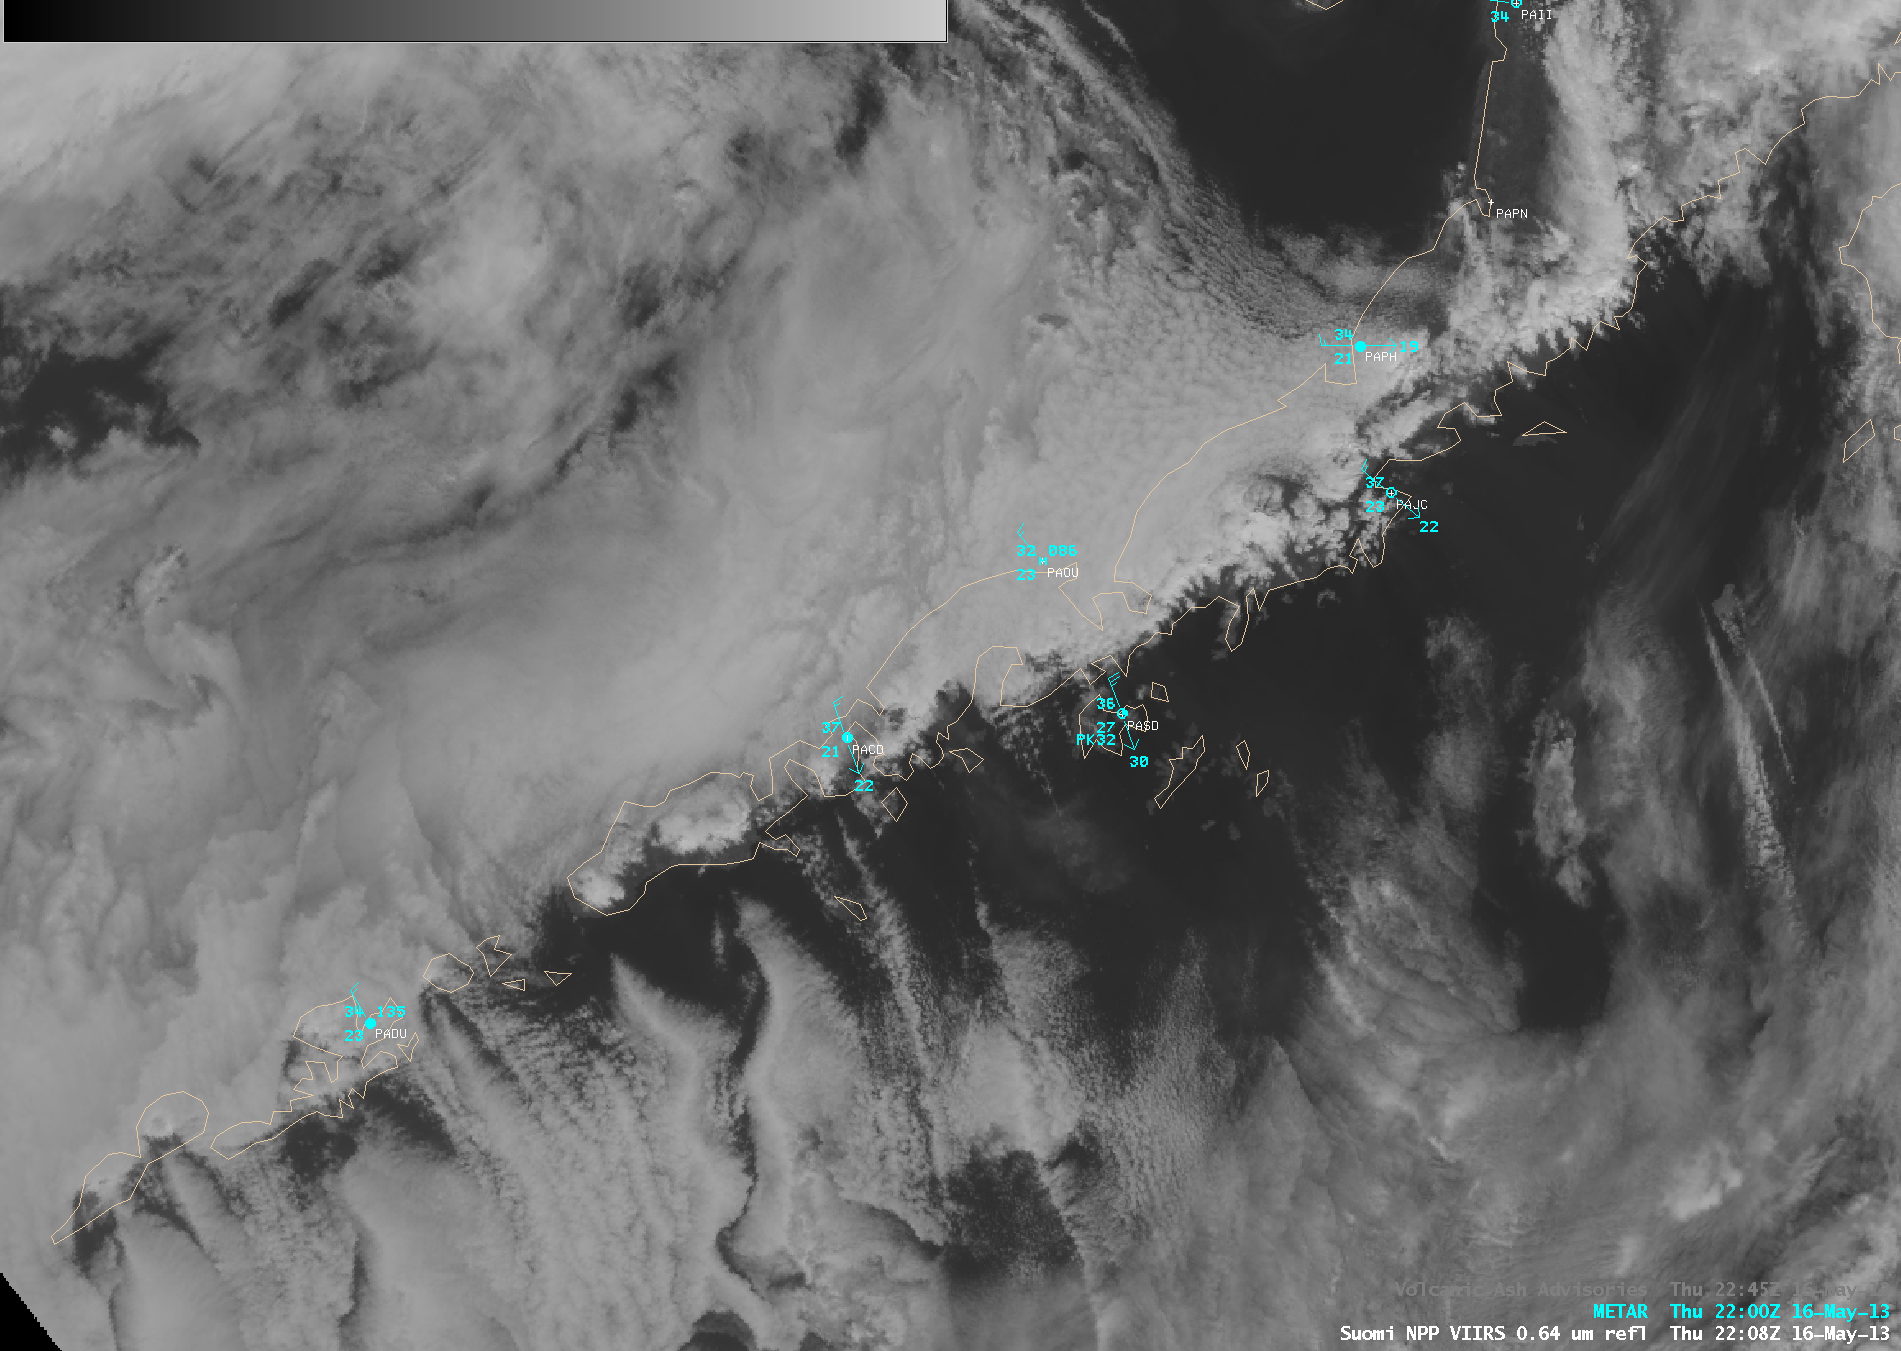 Suomi NPP VIIRS 0.64 Âµm visible channel and 3.74 Âµm shortwave IR channel images